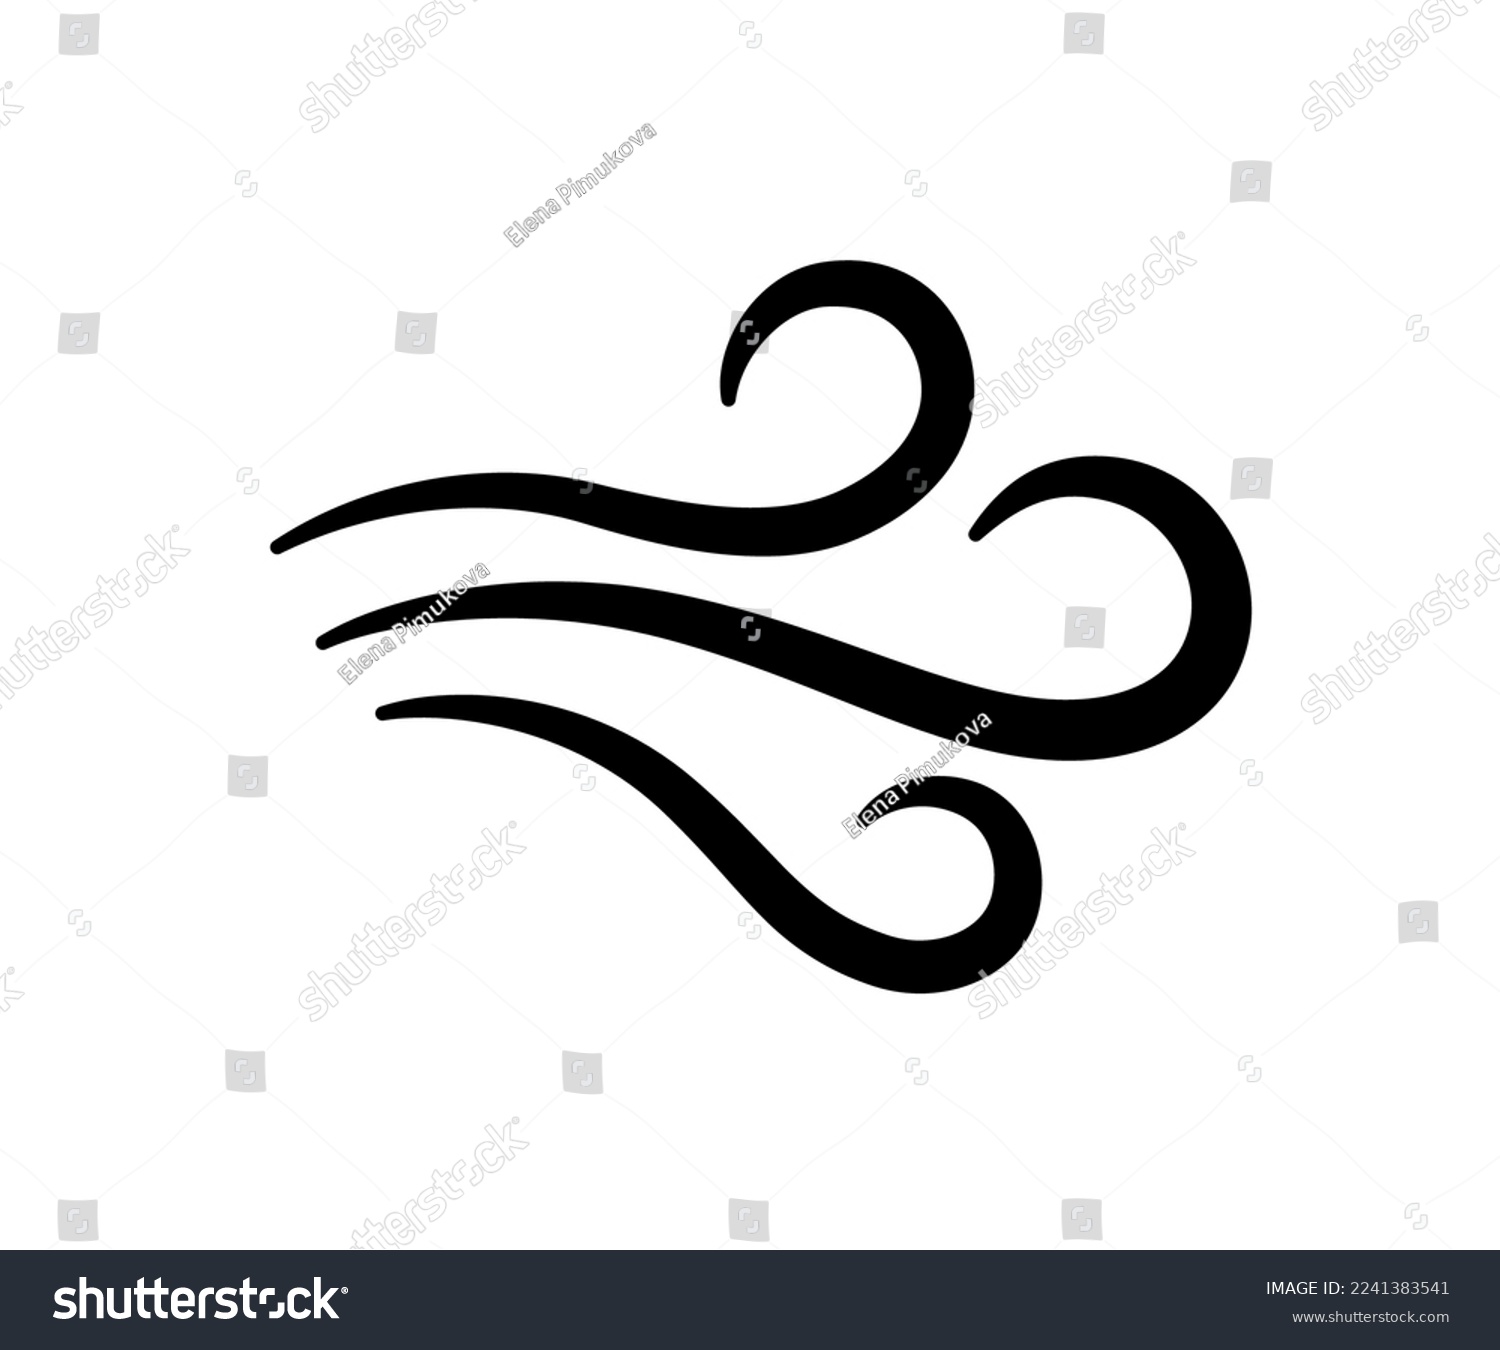 SVG of Hand drawn wind air flow icon. Free breath symbol. Fresh air flow sign. Doodle wind blow icons. Weather symbol. Climate design element. Vector illustration isolated on white background. svg